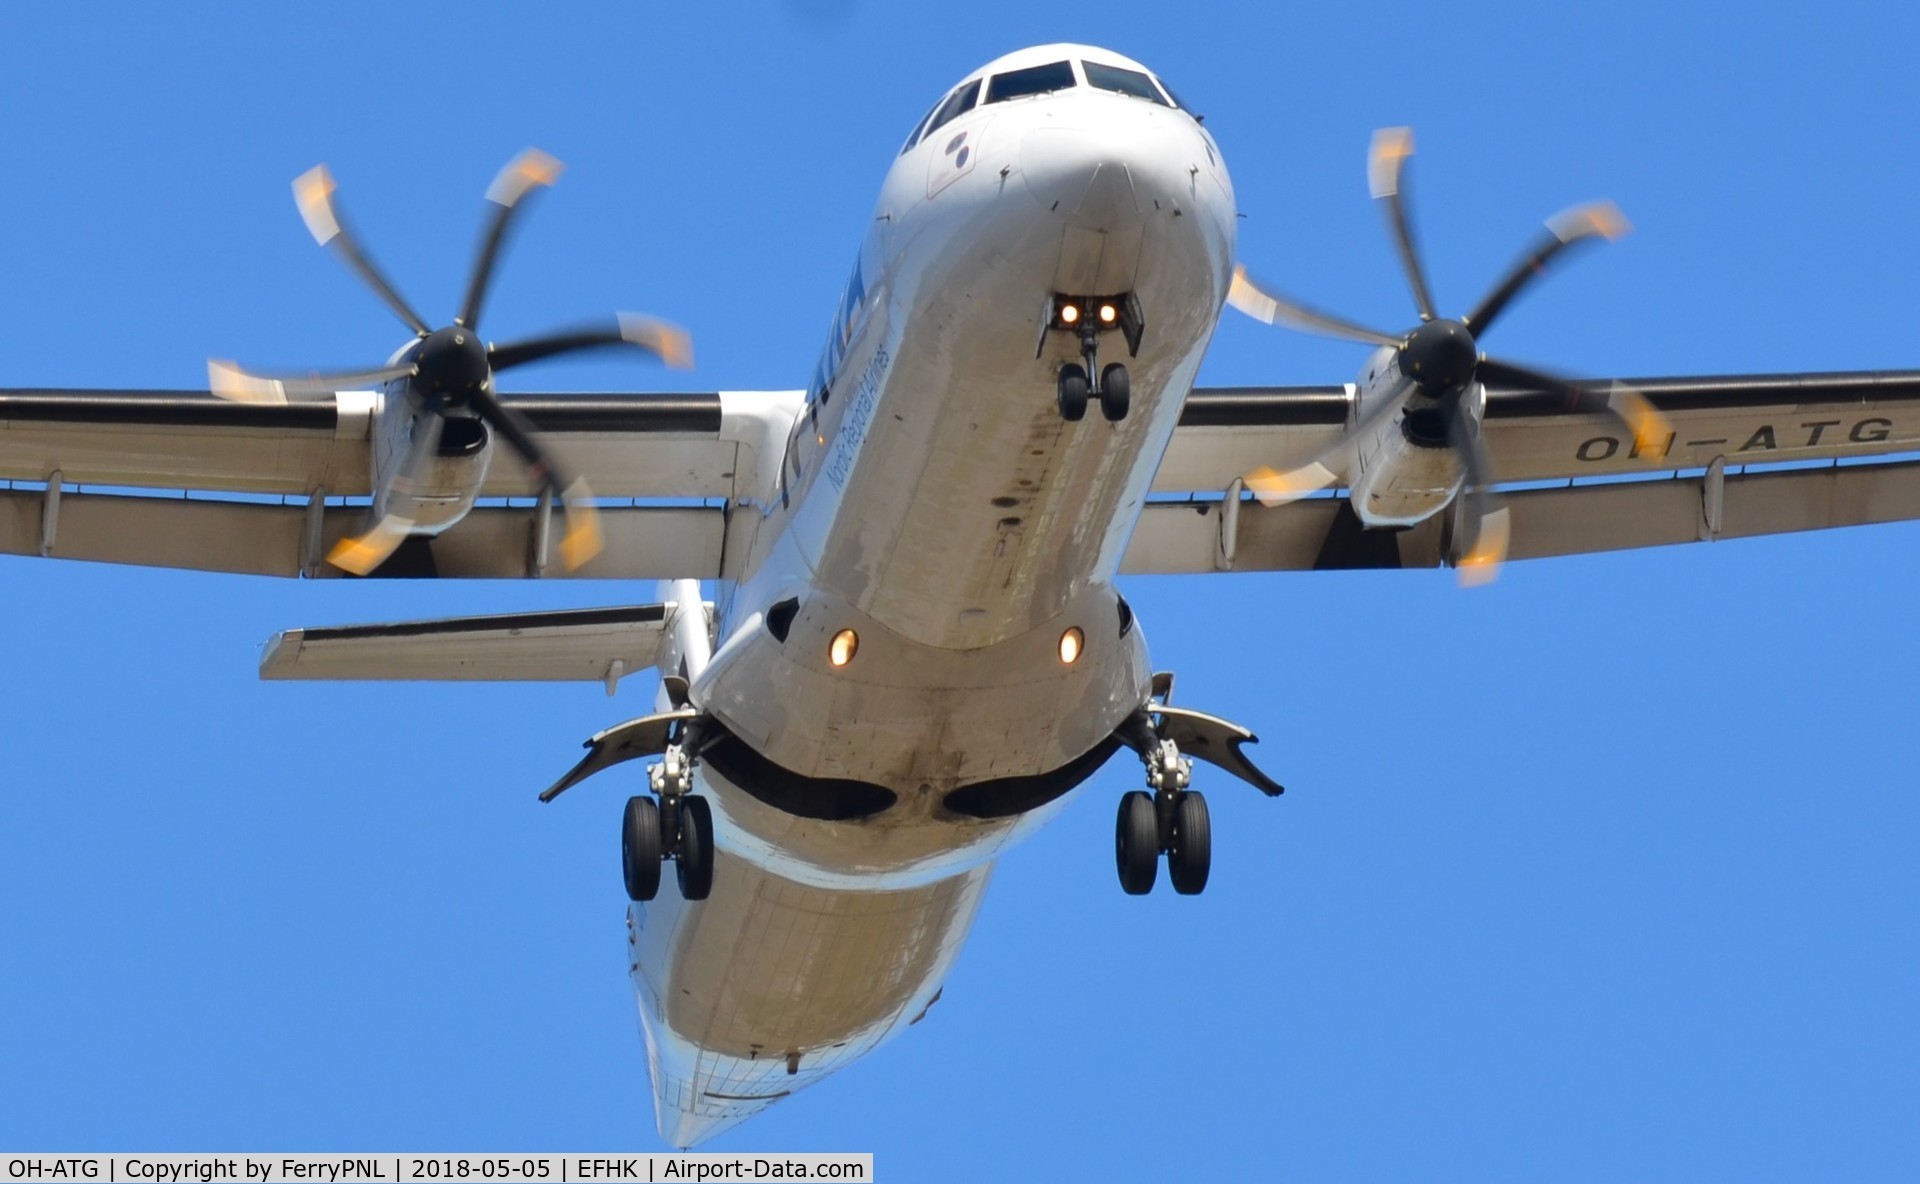 OH-ATG, 2007 ATR 72-212A C/N 757, Norra ATR72 passing closely overhead for landing.